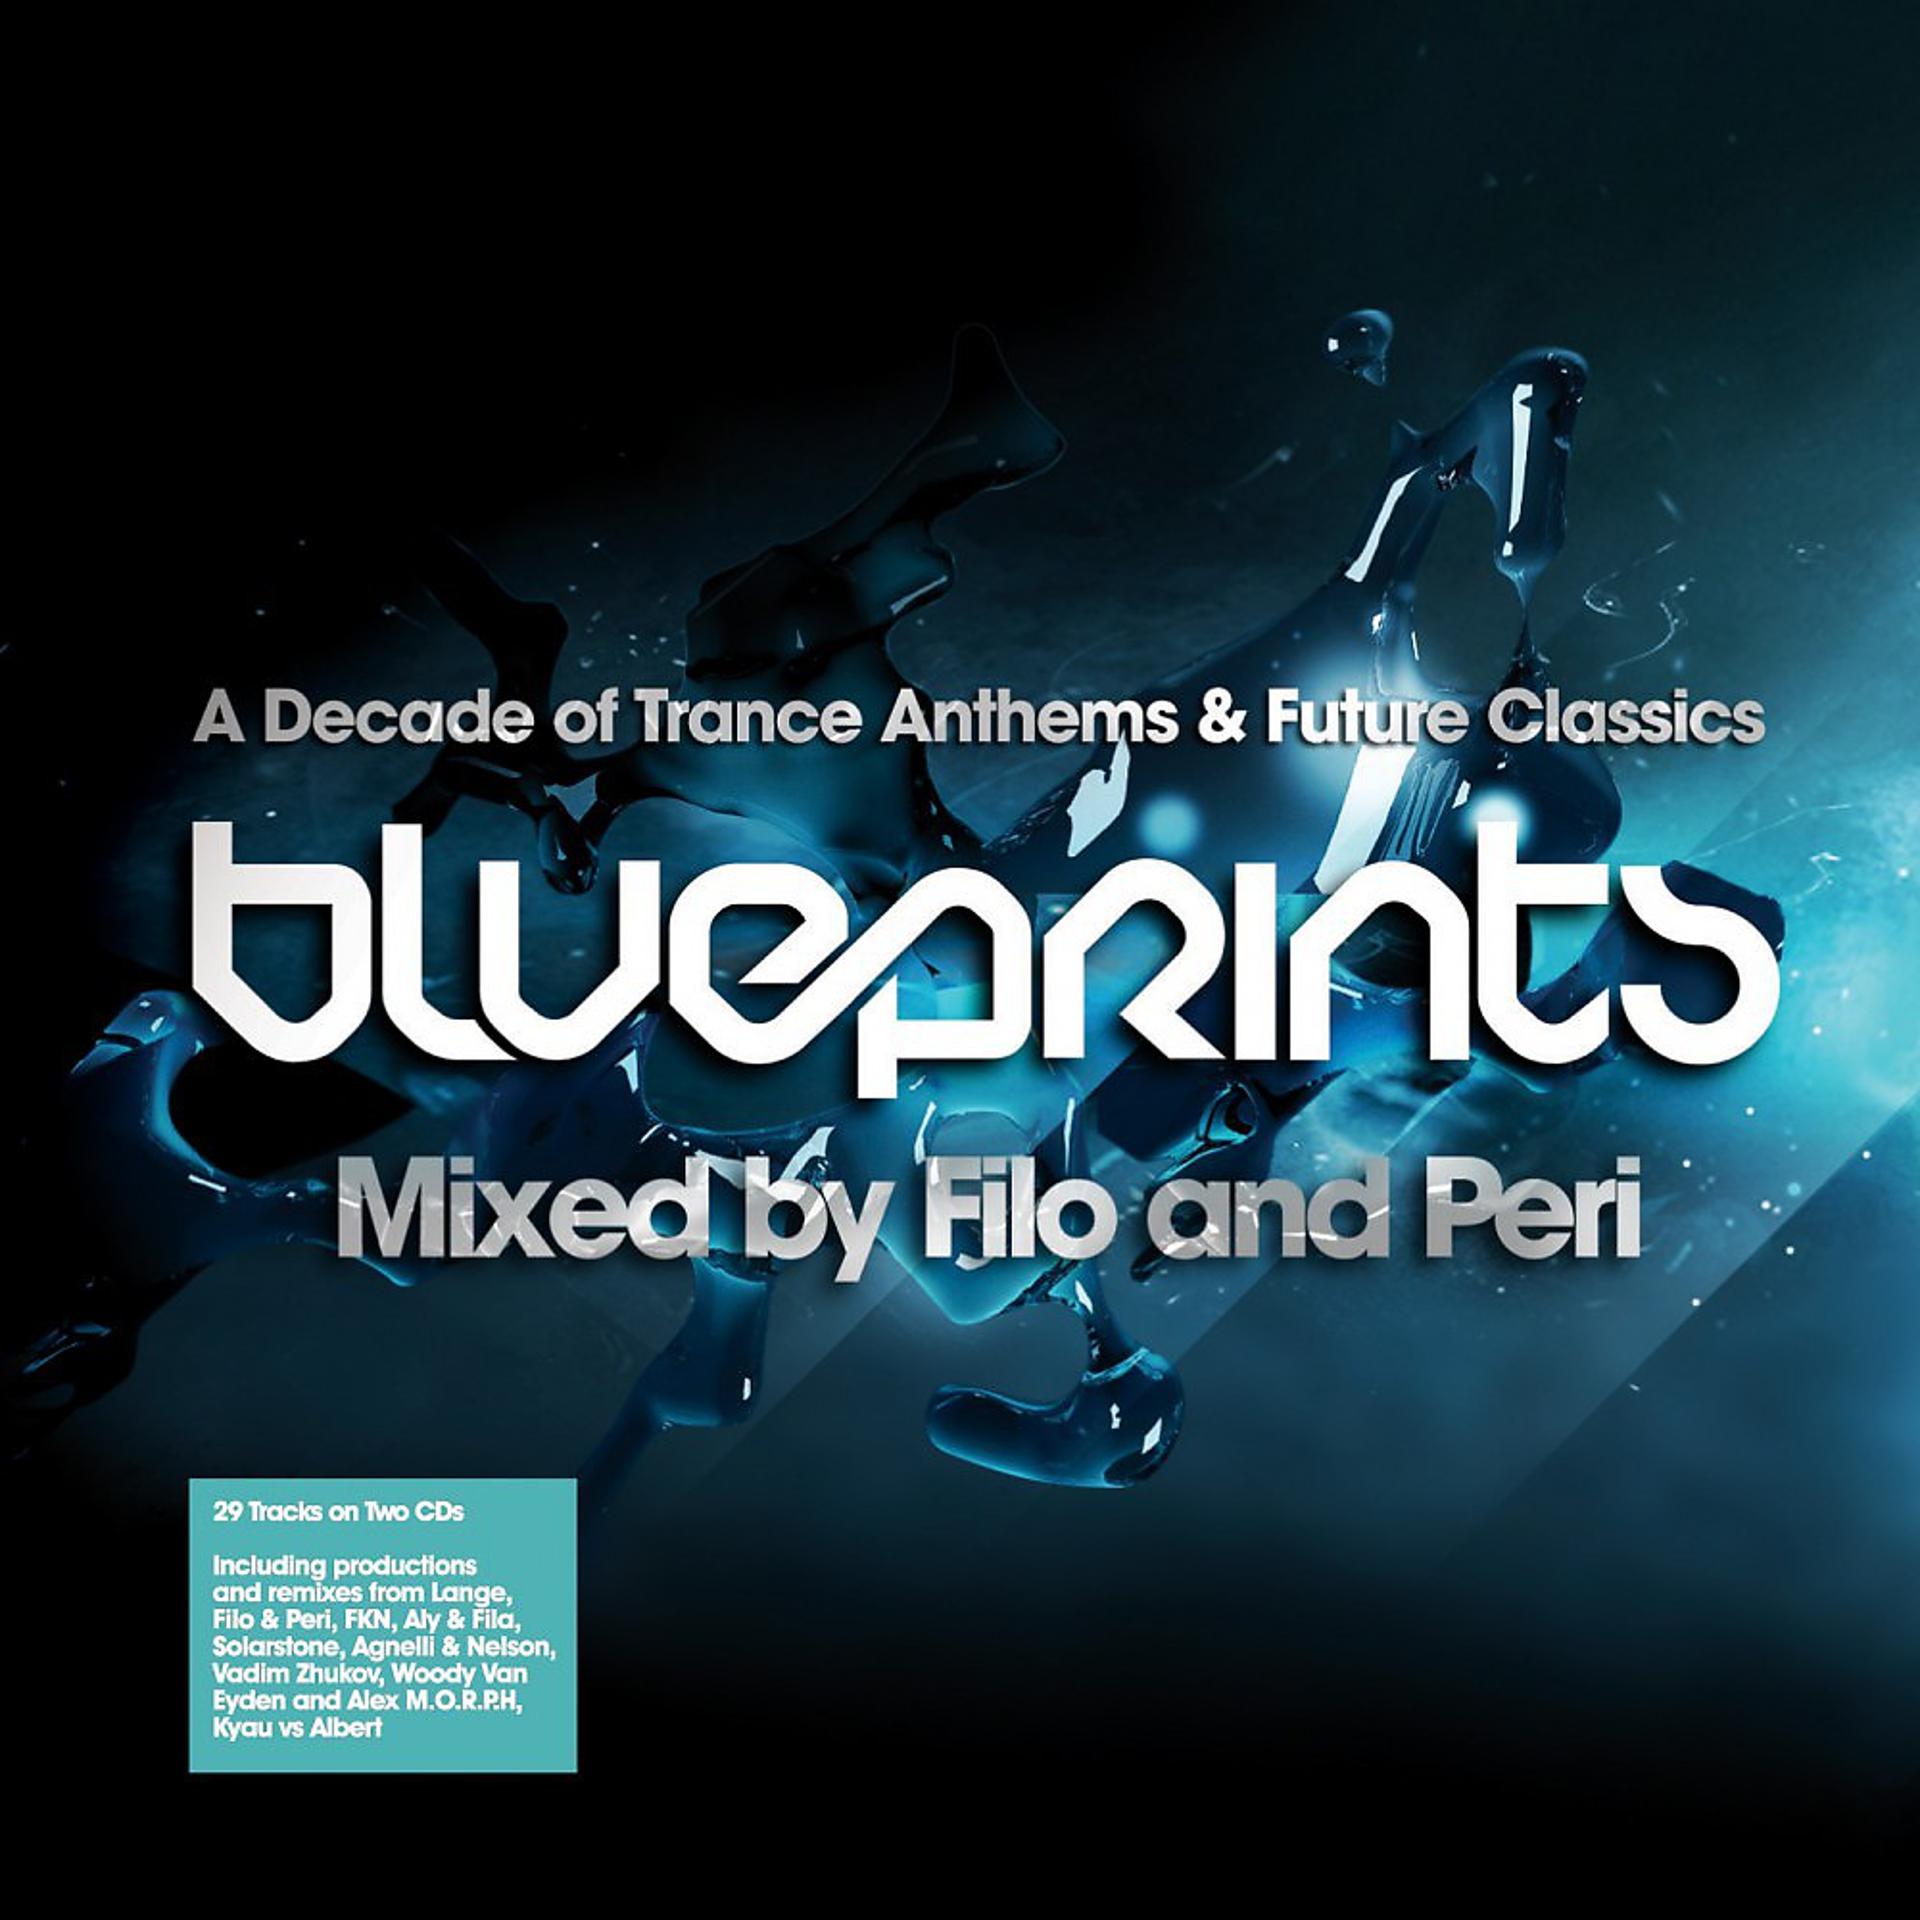 Постер альбома Blueprints - Mixed By Filo and Peri - A Decade of Trance Classics and Future Anthems (Unmixed)